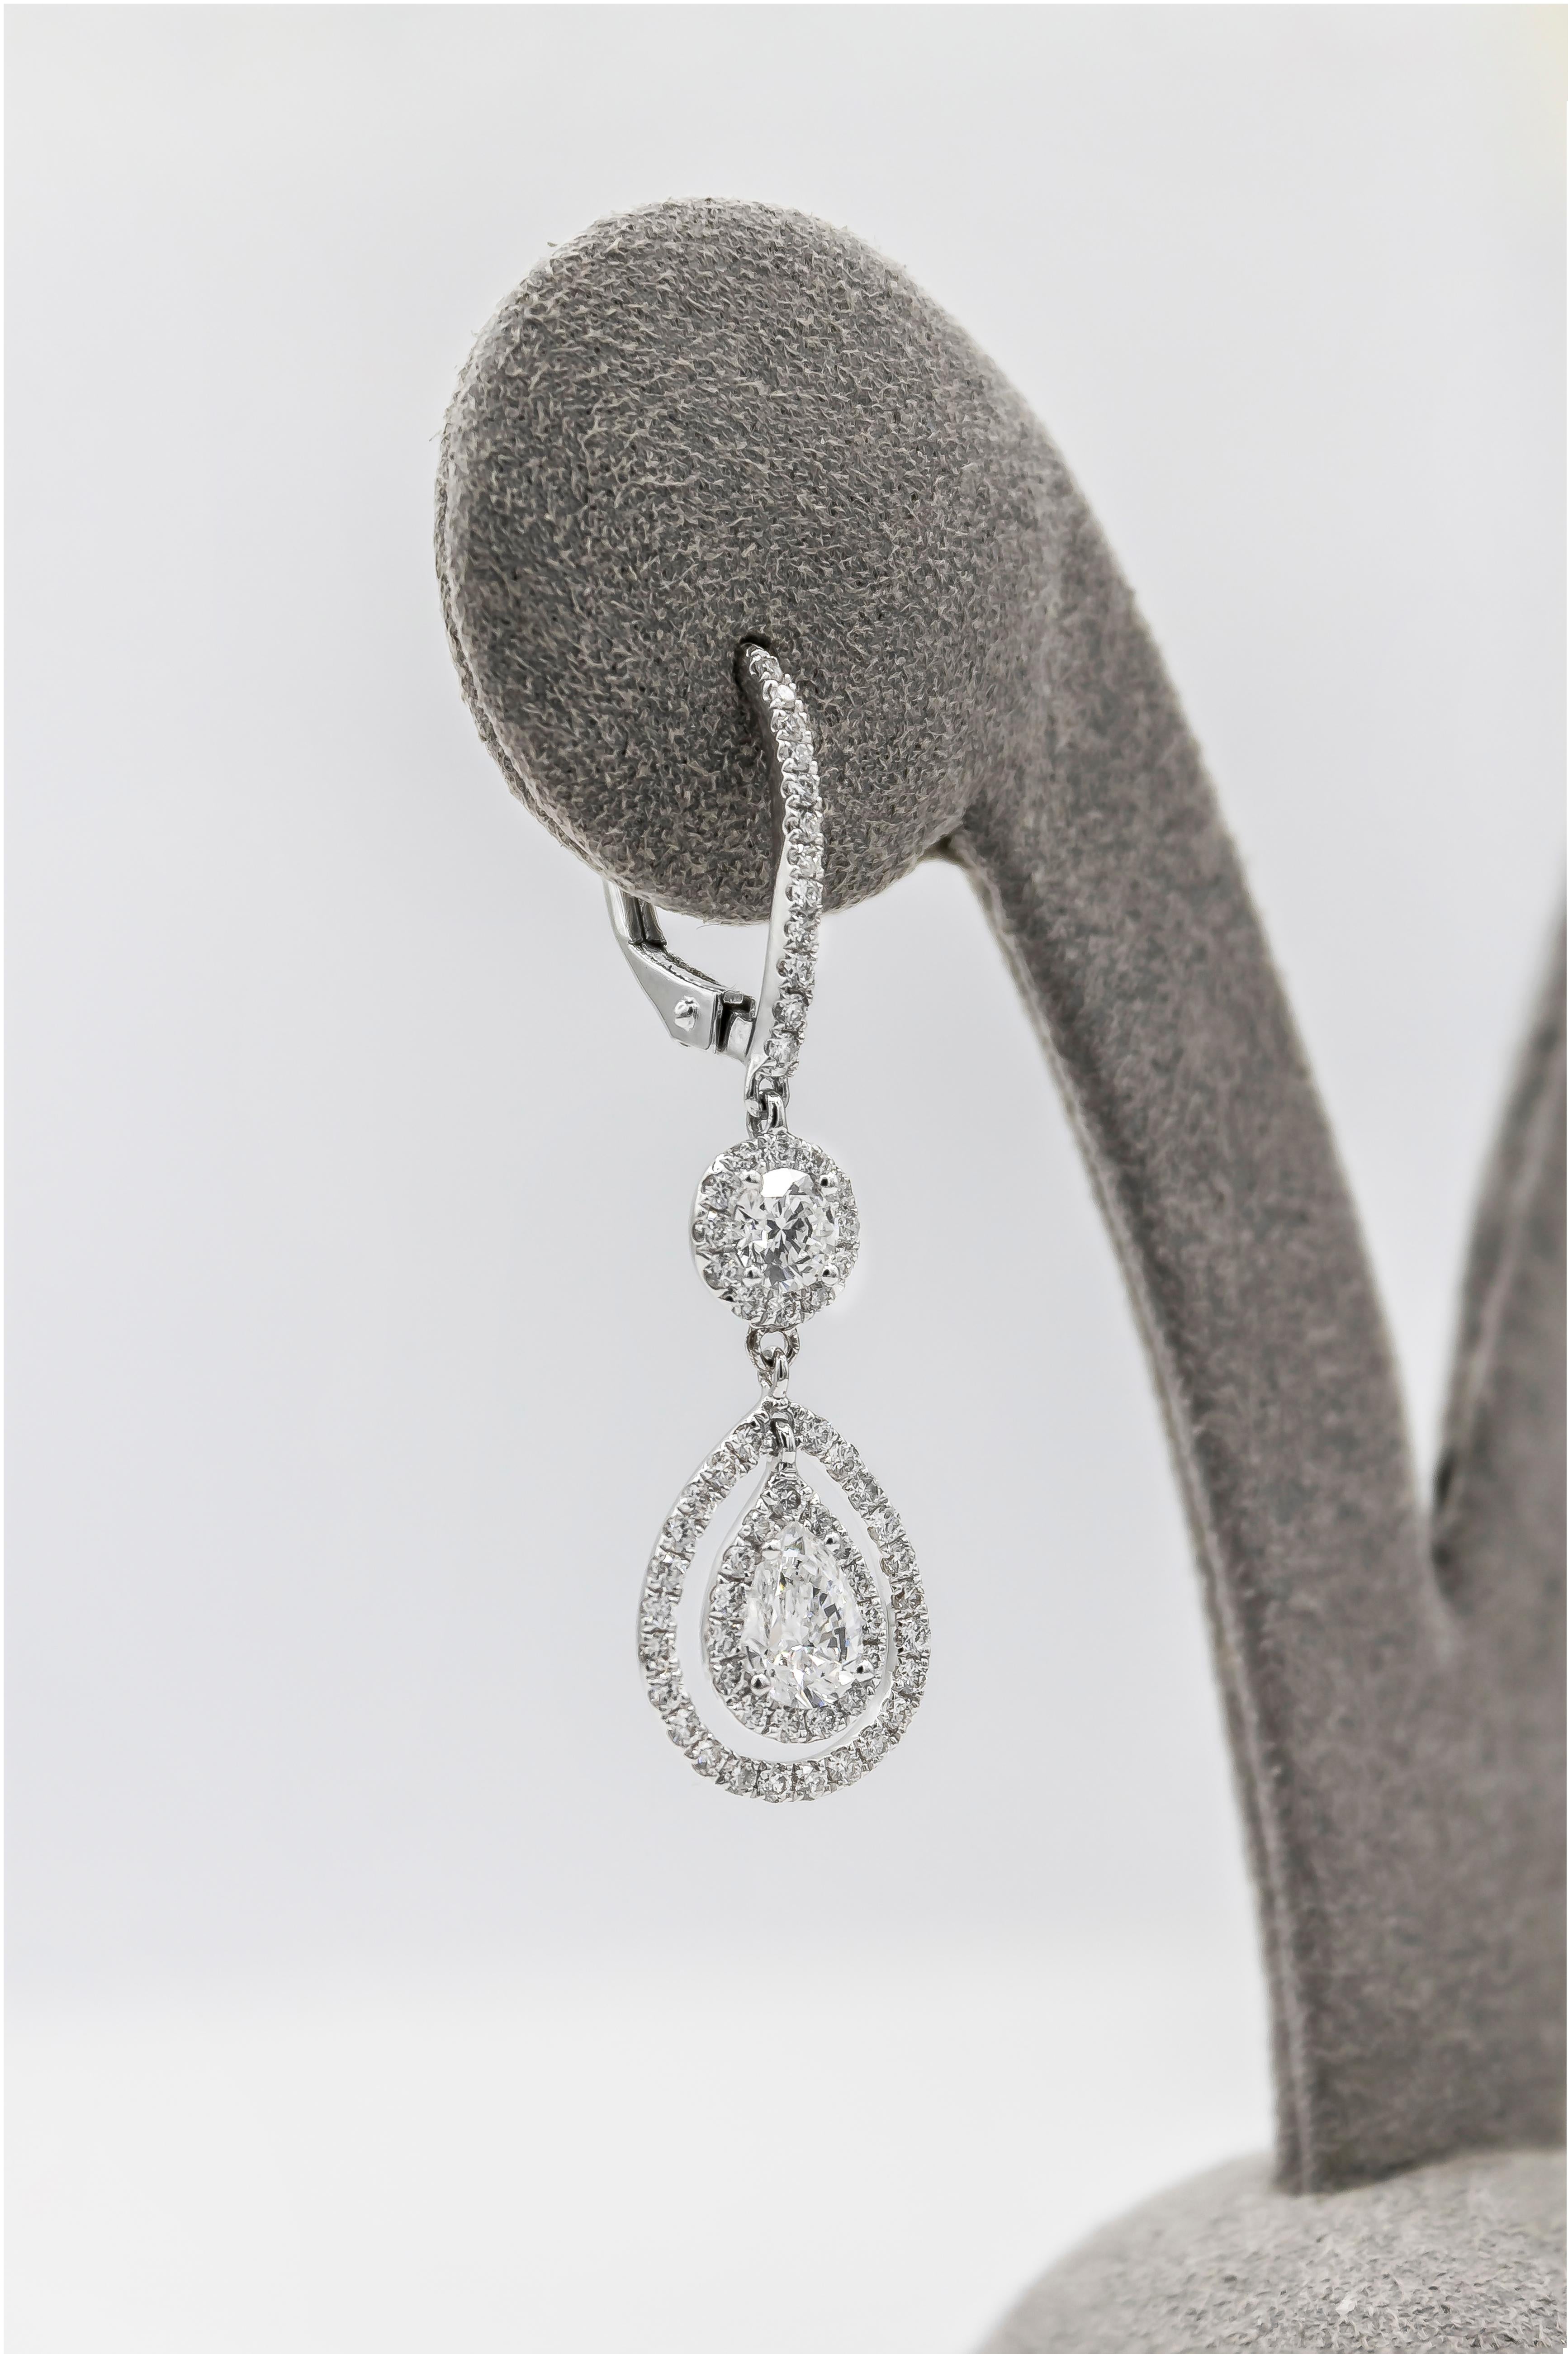 A brilliant pair of earrings showcasing a pear shape diamond weighing 0.63 carats in the center, surrounded by two rows of brilliant round diamonds in a halo design, and suspended on a diamond encrusted hoop. Made in 18K White Gold. 

Style